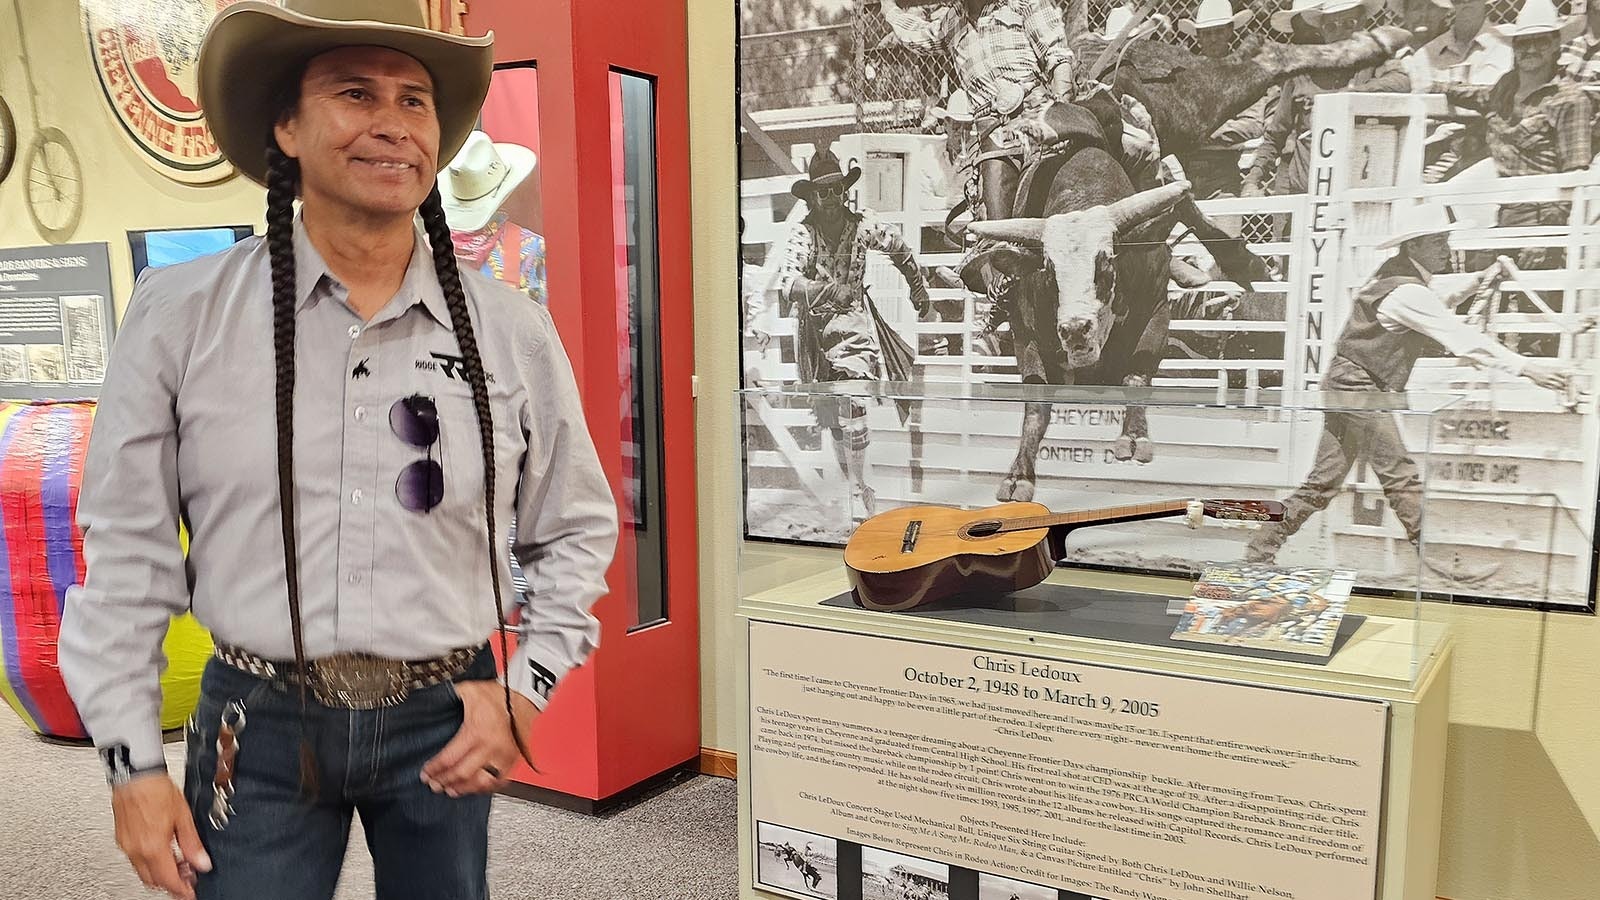 Yellowstone TV actor Moses Brings Plenty at the Chris Ledoux exhibit at Cheyenne Frontier Days Old West Museum.